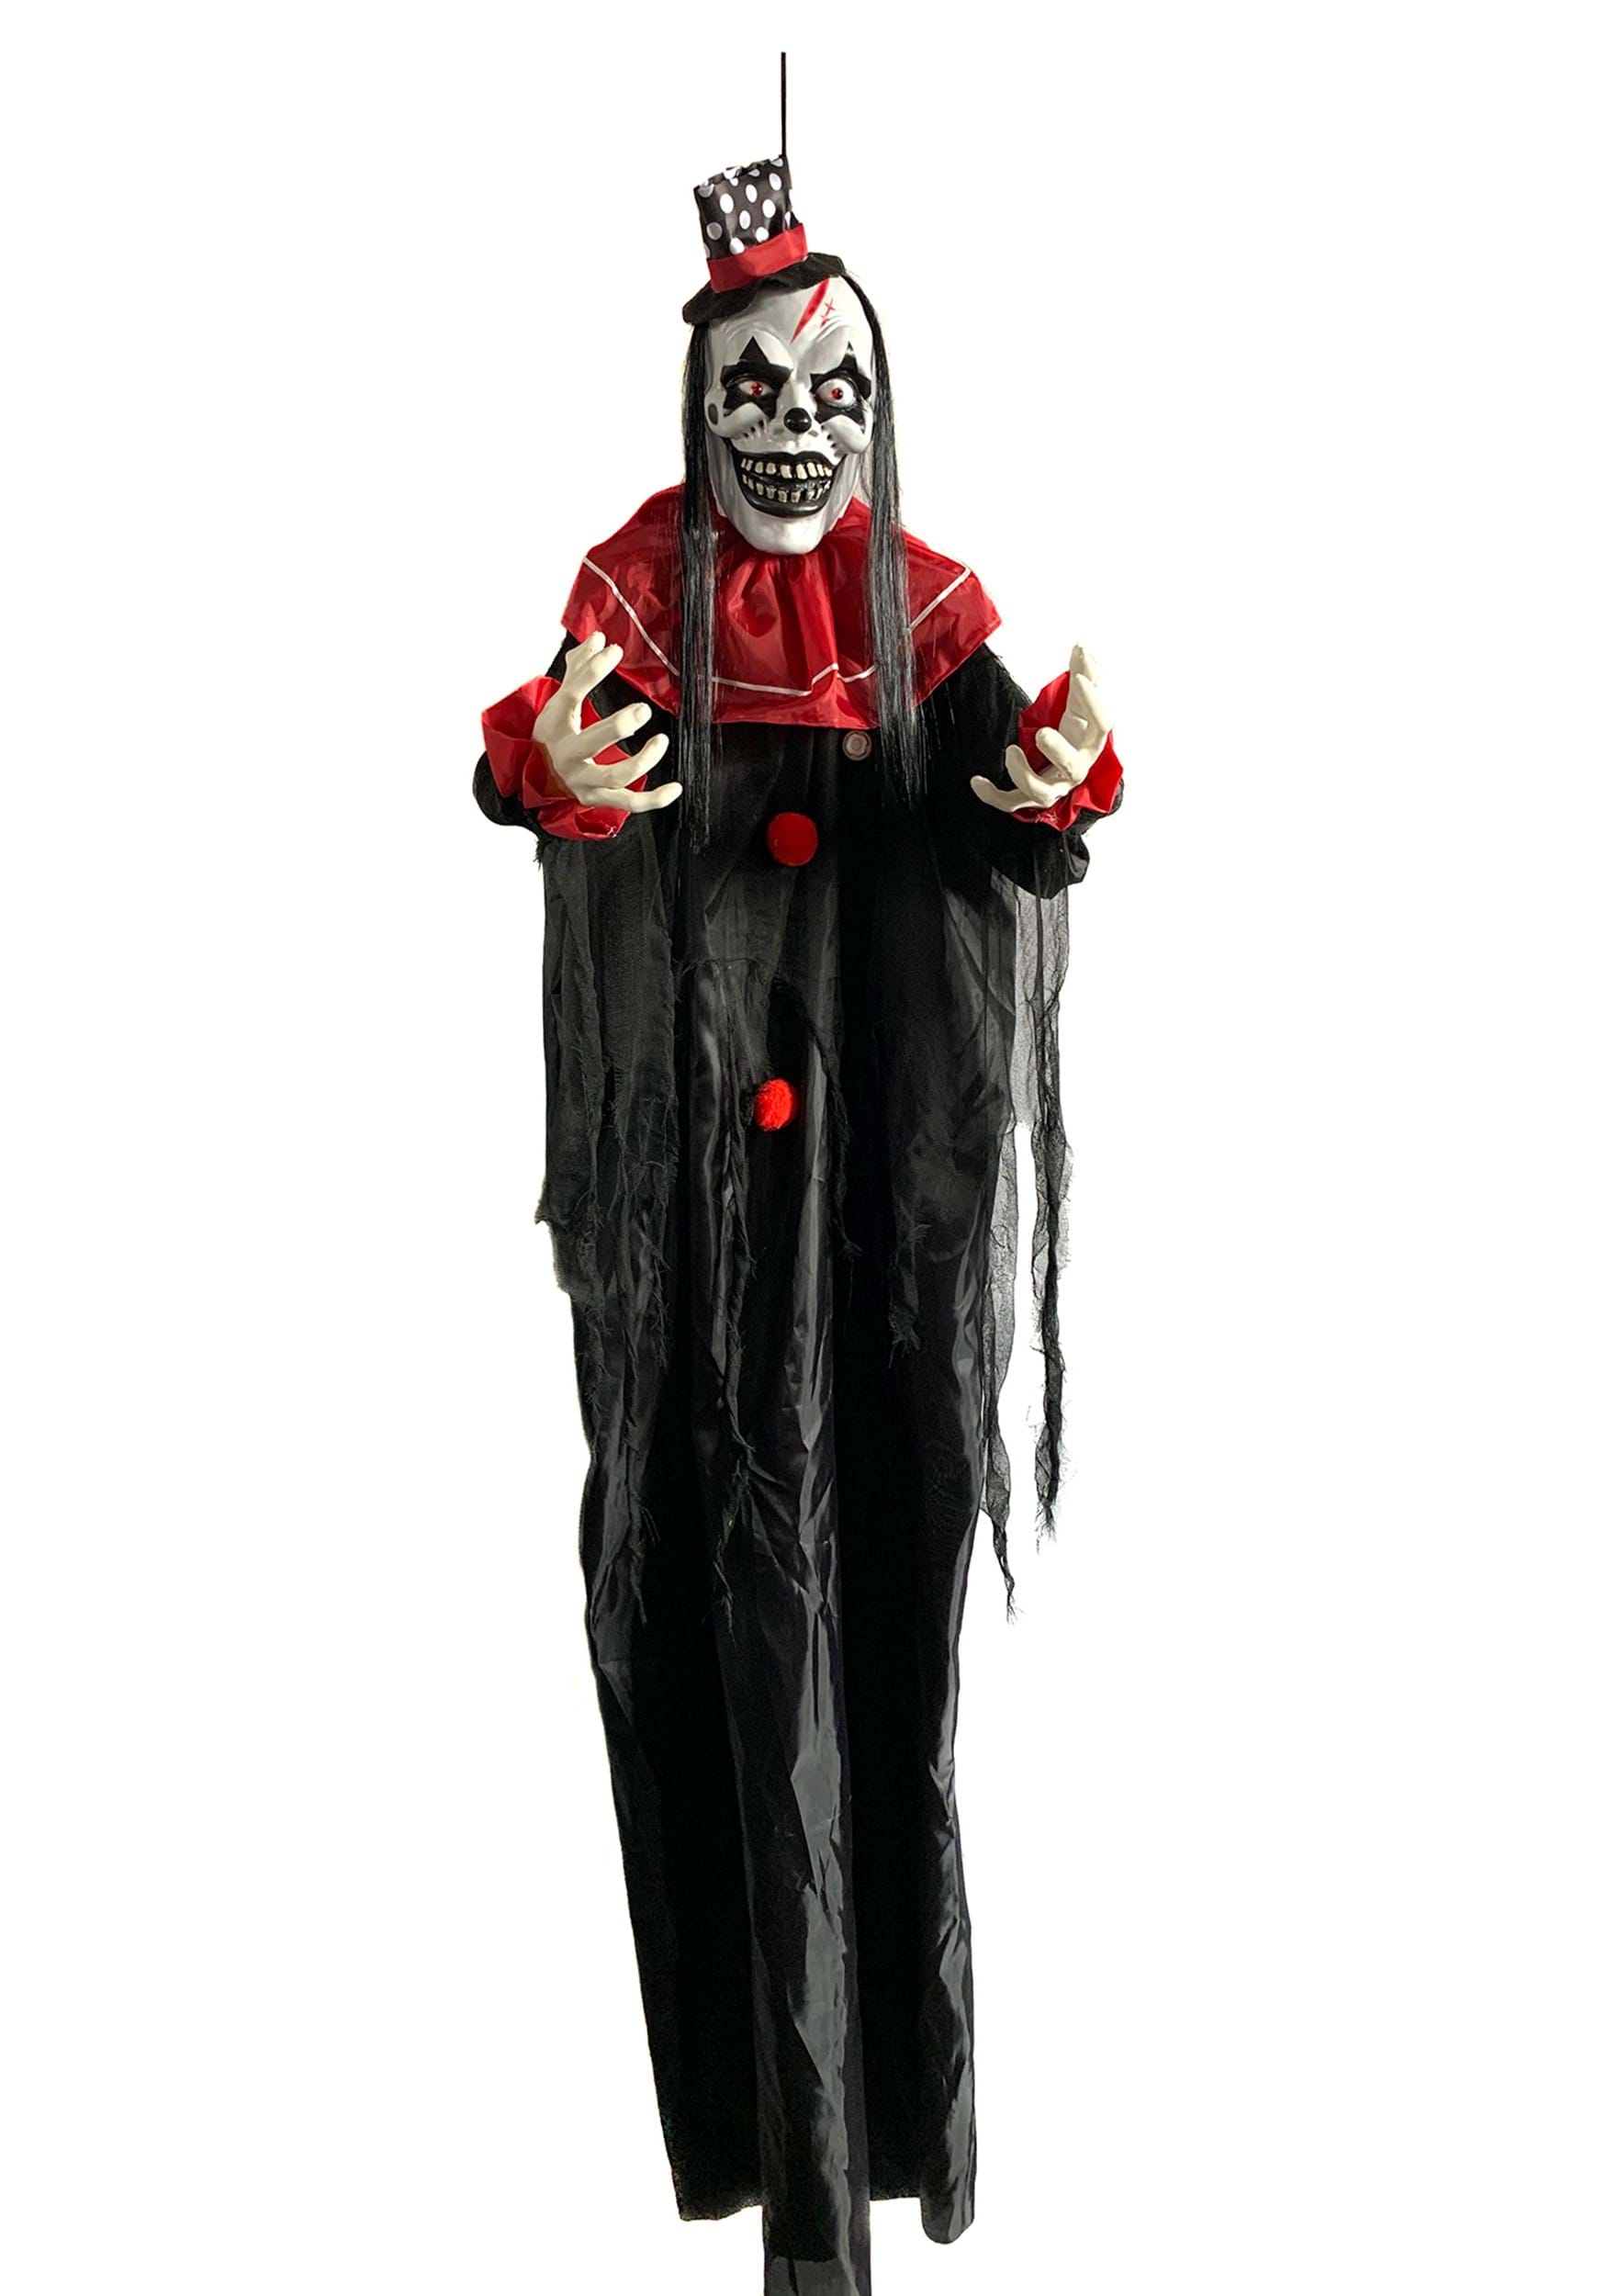 6FT Hanging Evil Clown with Hat Prop